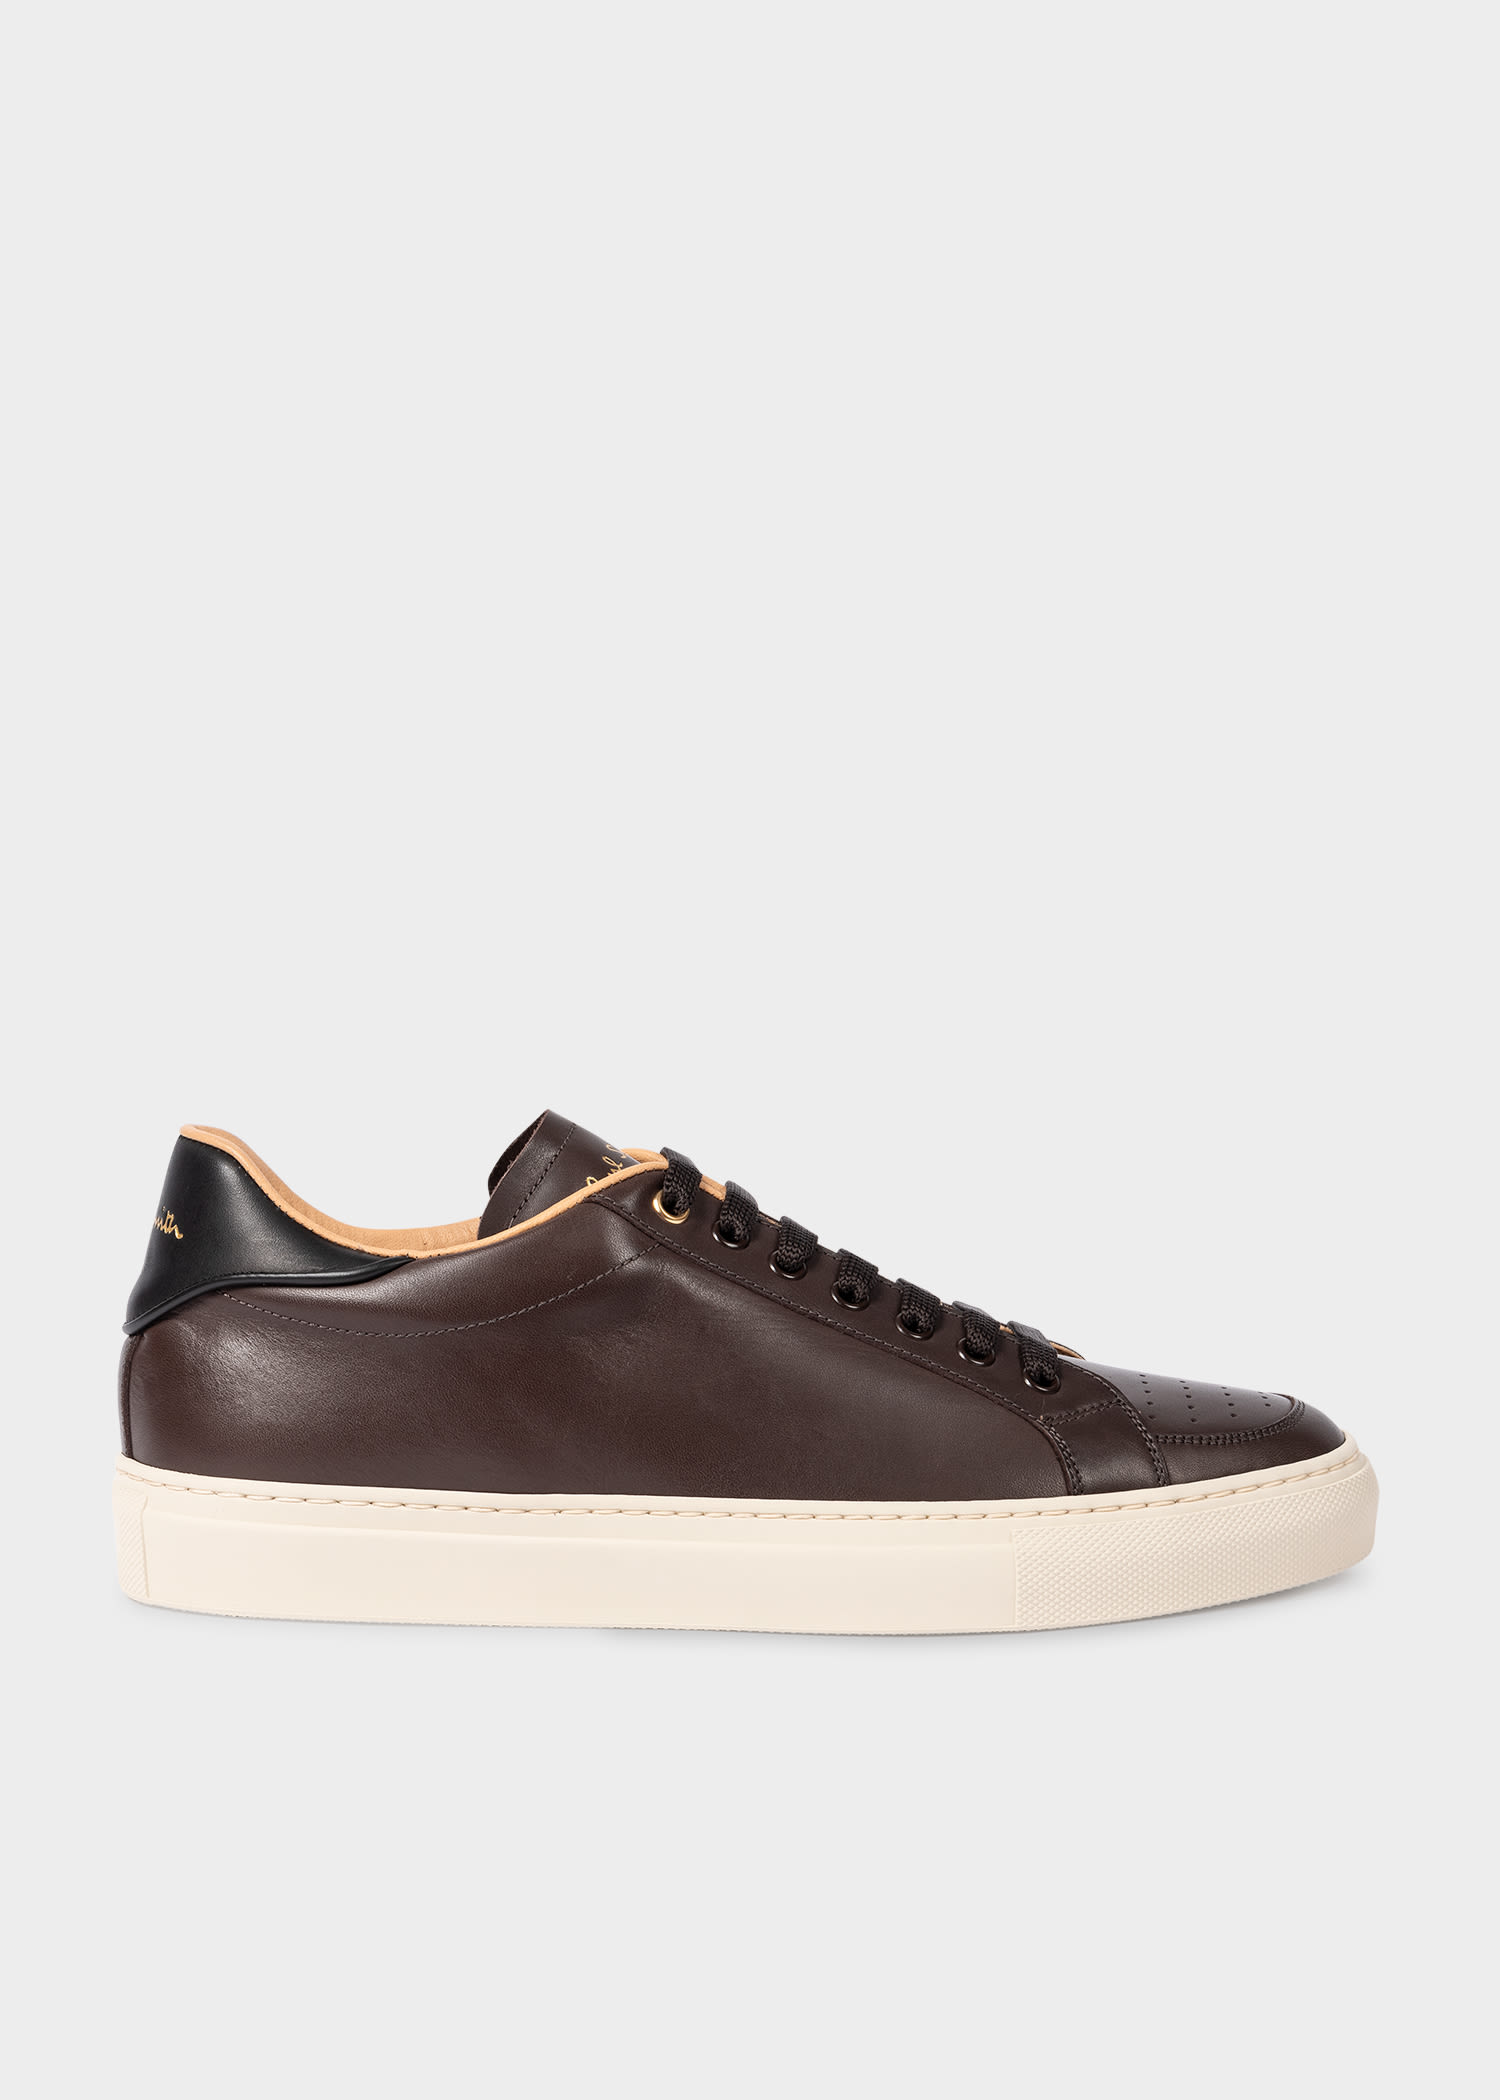 Men's Brown Leather 'Banf' Trainers